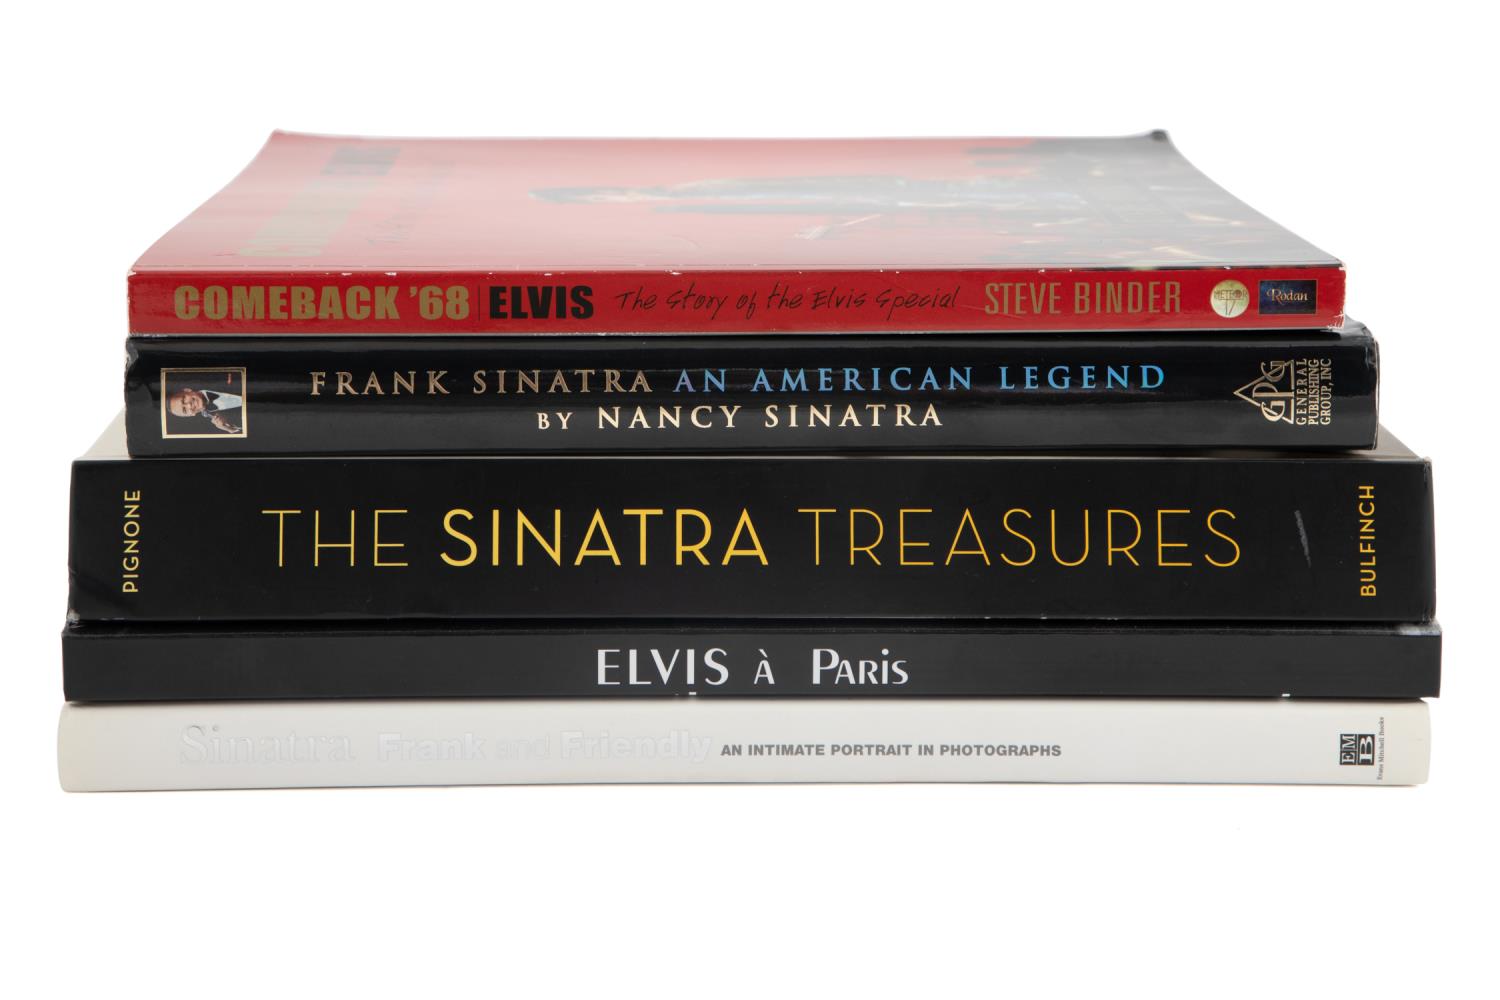 FIVE BOOKS ON ELVIS PRESLEY AND